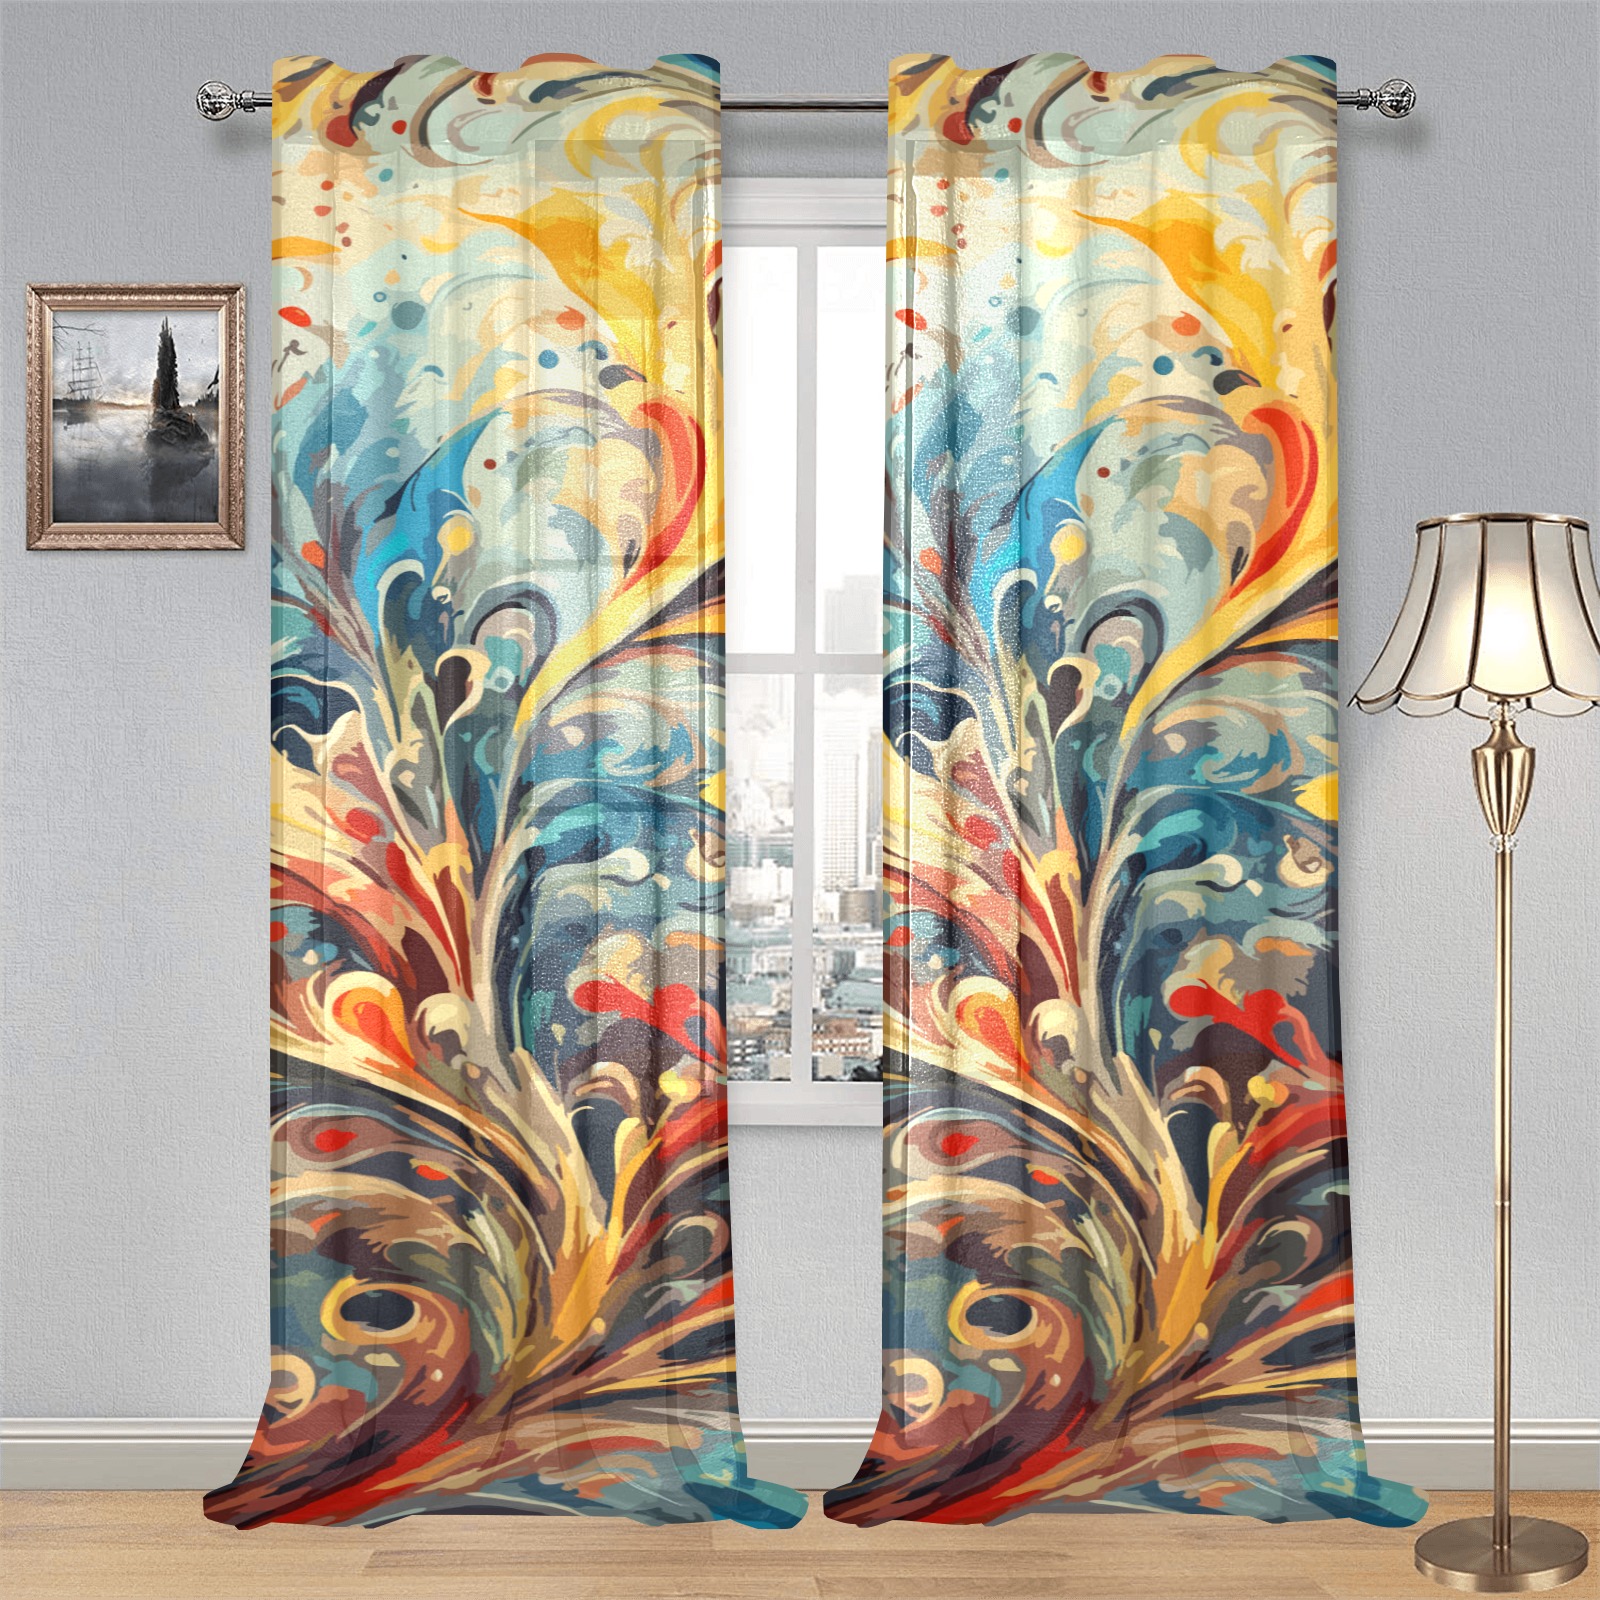 Stunning abstract floral ornament. Colorful art. Gauze Curtain 28"x95" (Two-Piece)